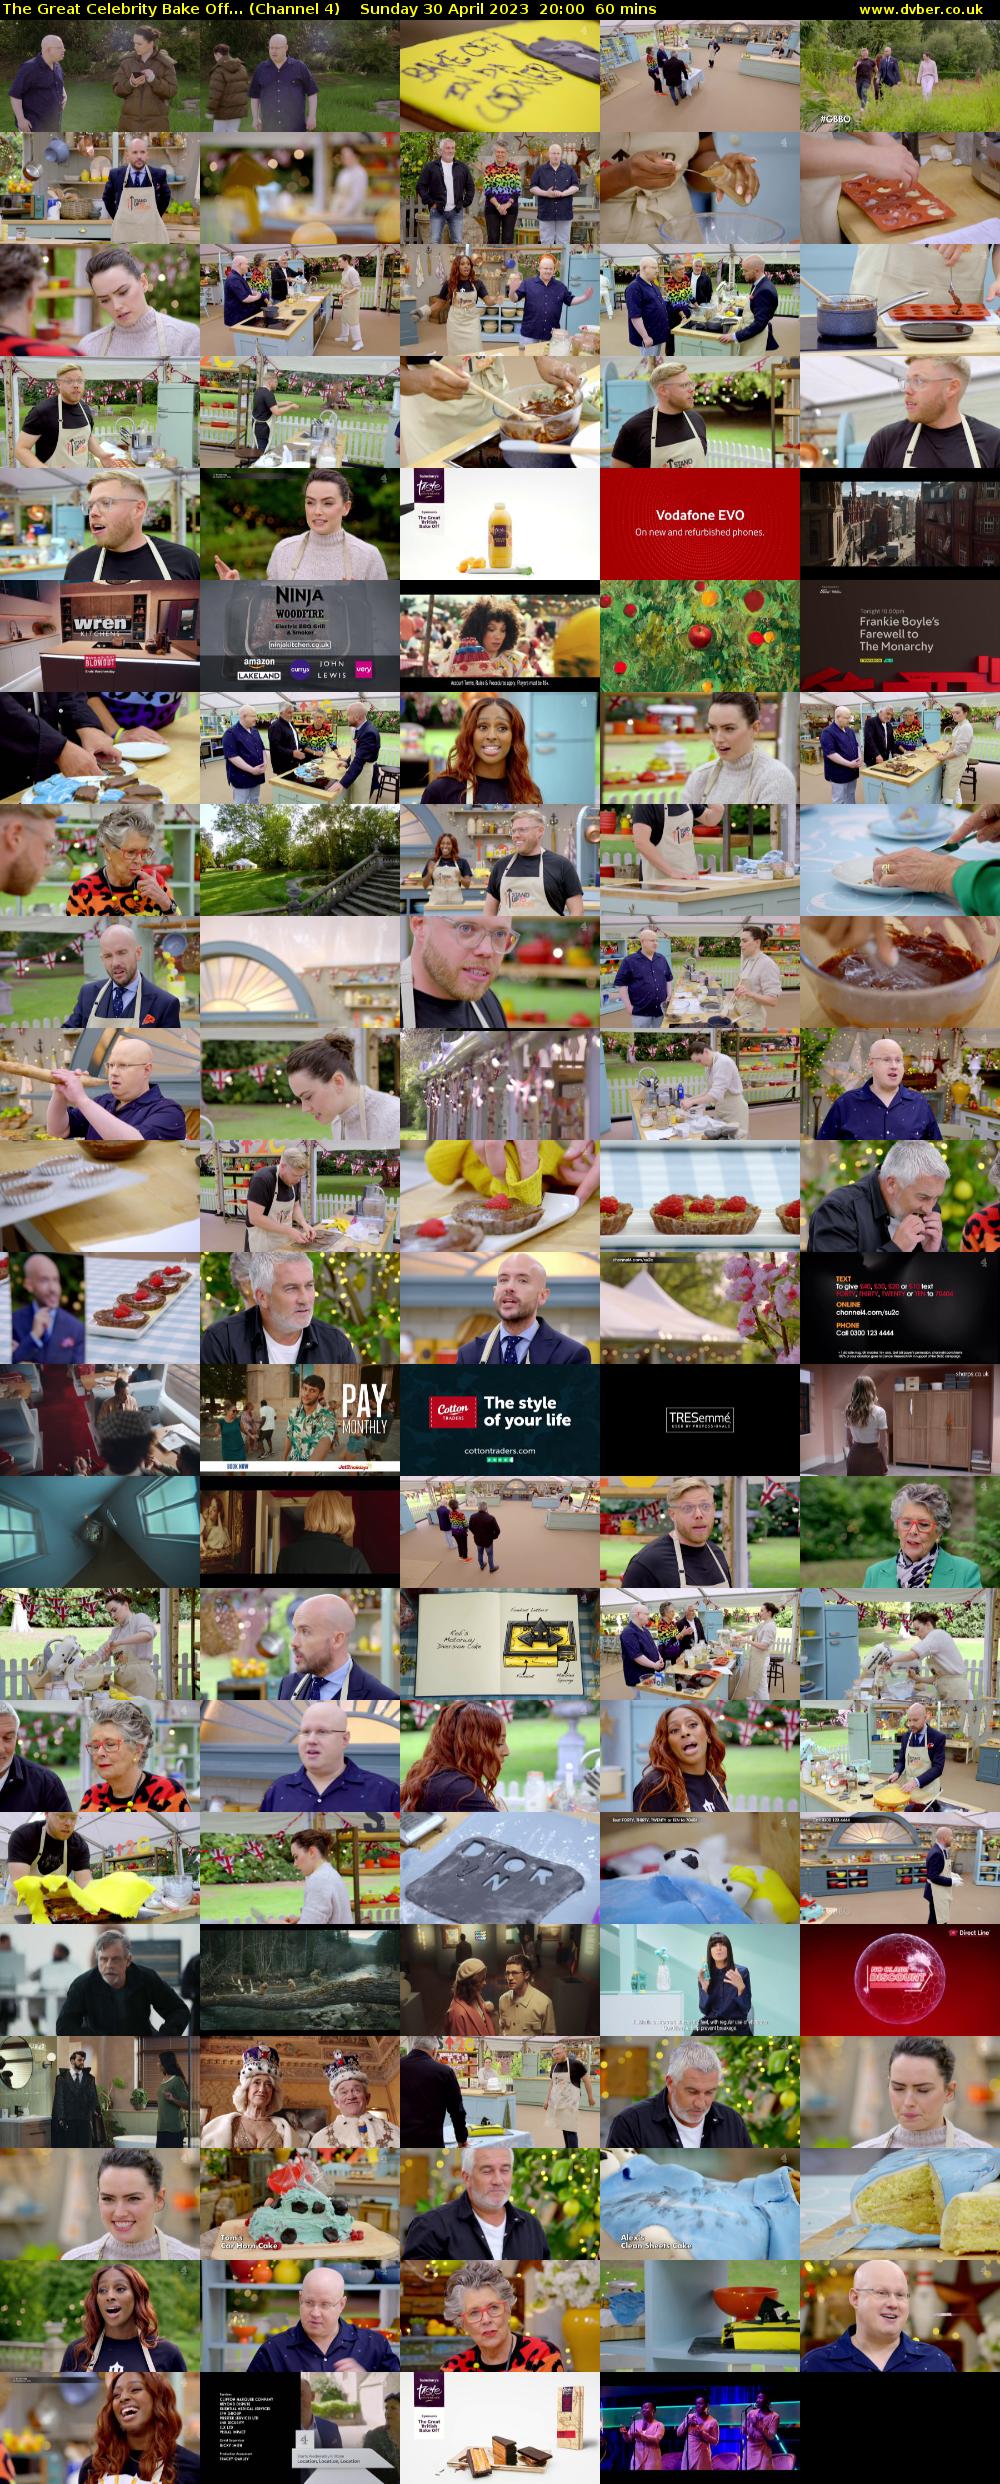 The Great Celebrity Bake Off... (Channel 4) Sunday 30 April 2023 20:00 - 21:00